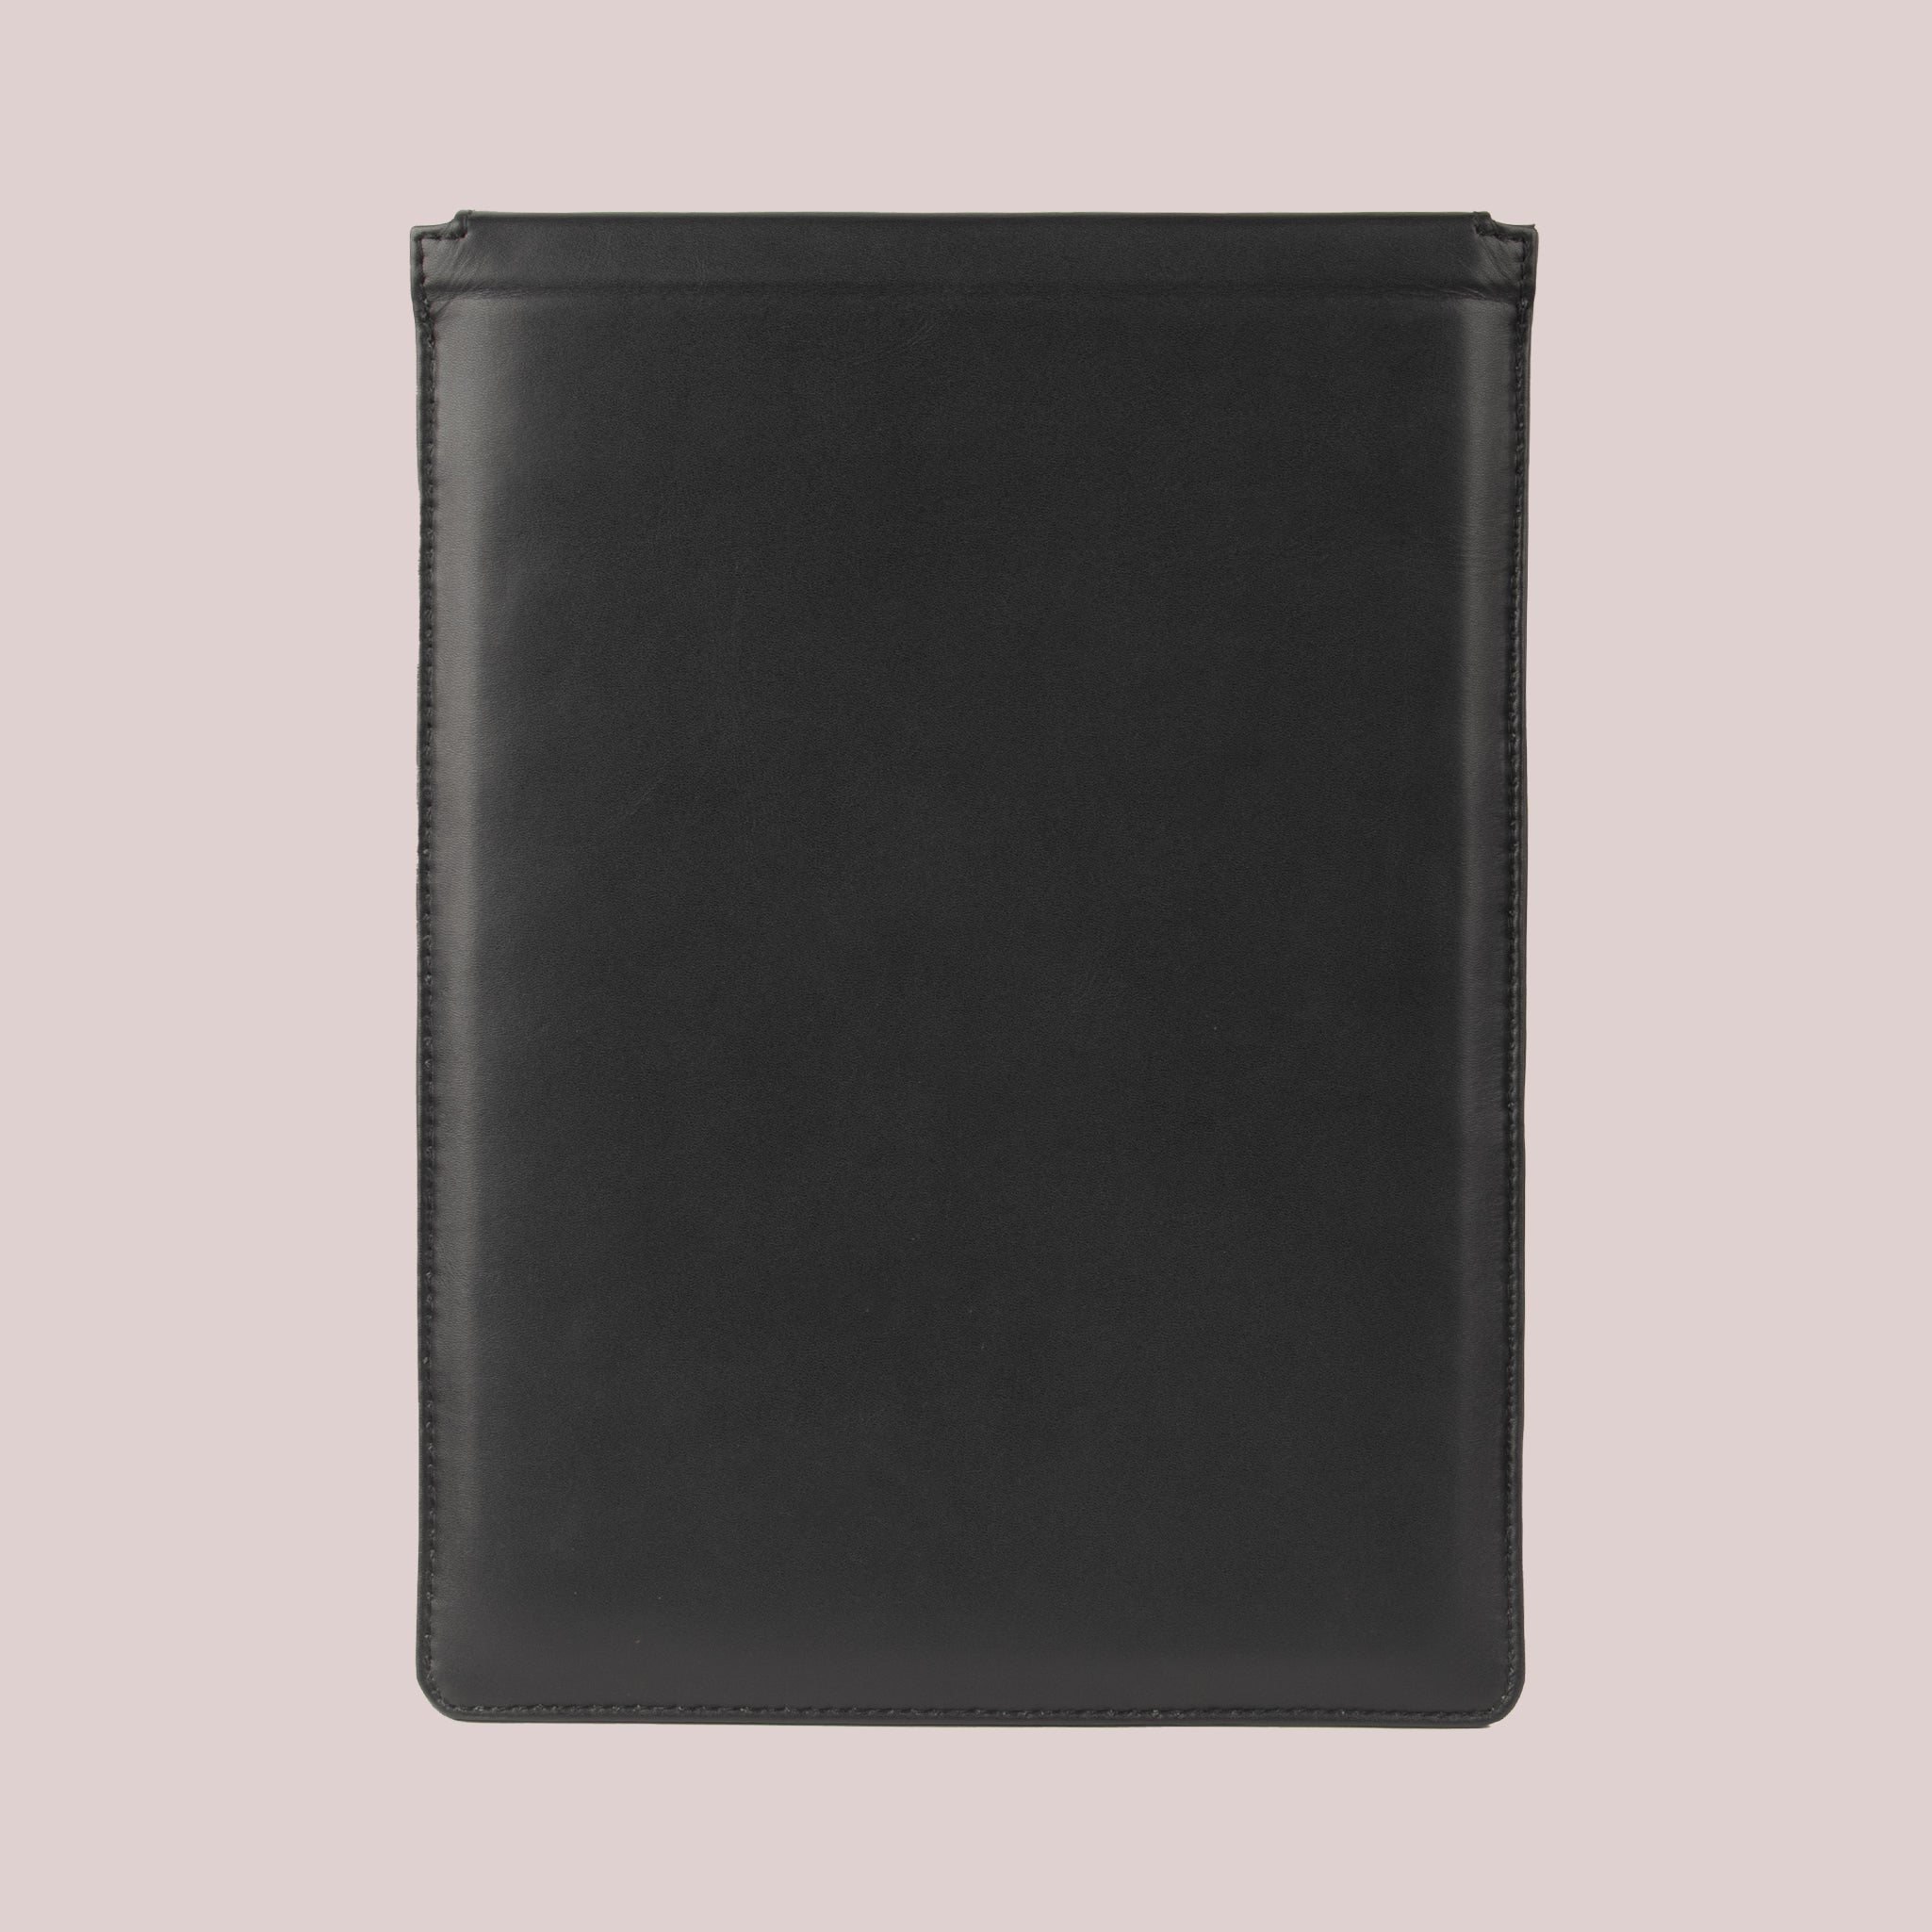 Order Macbook leather sleeve in a stylish black color